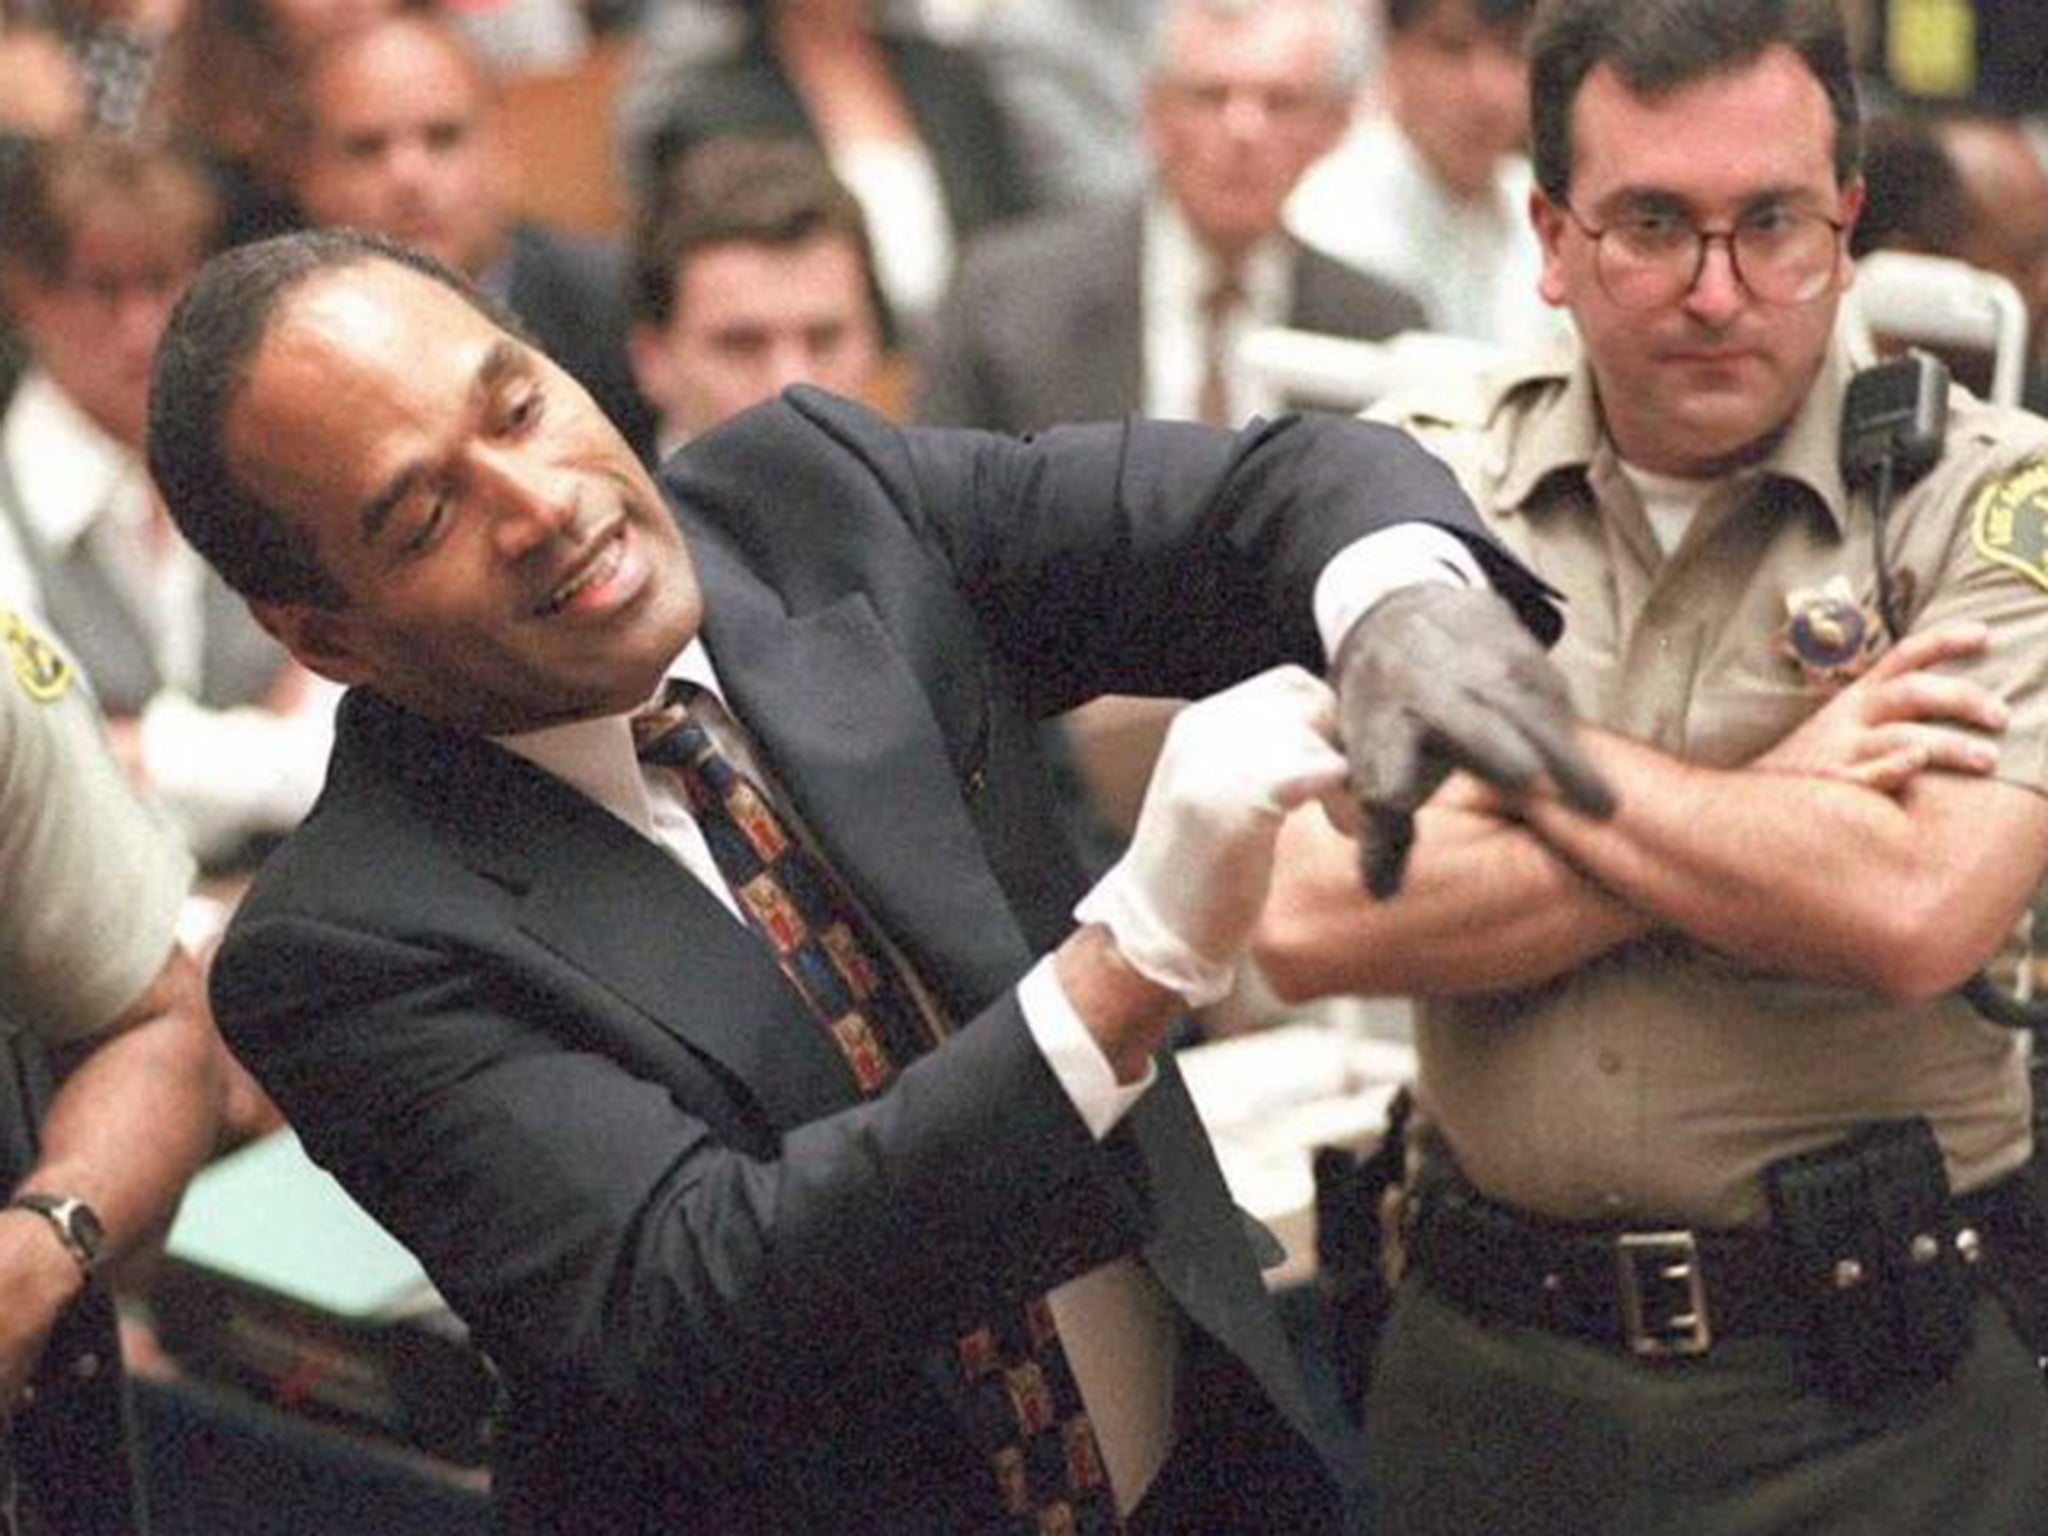 O J Simpson trying on one of the bloody gloves during his murder trial